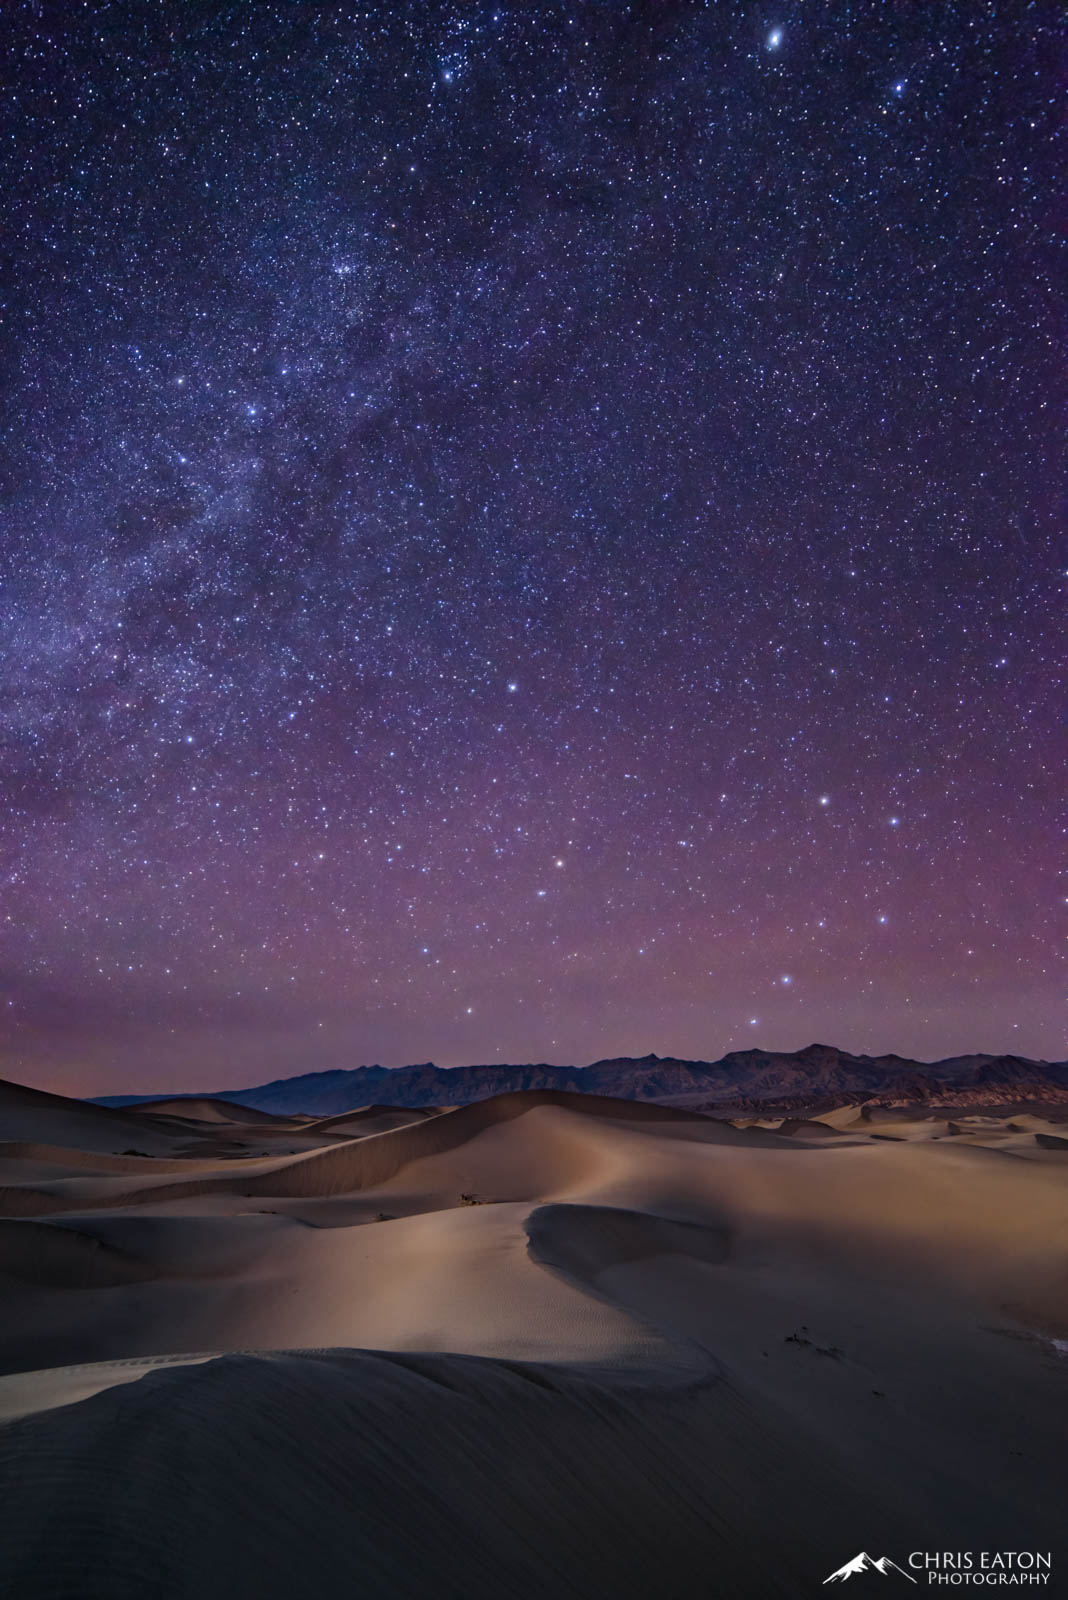 Milky Way and Big Dipper over Mesquite Flat Sand Dunes in Death Valley National Park.